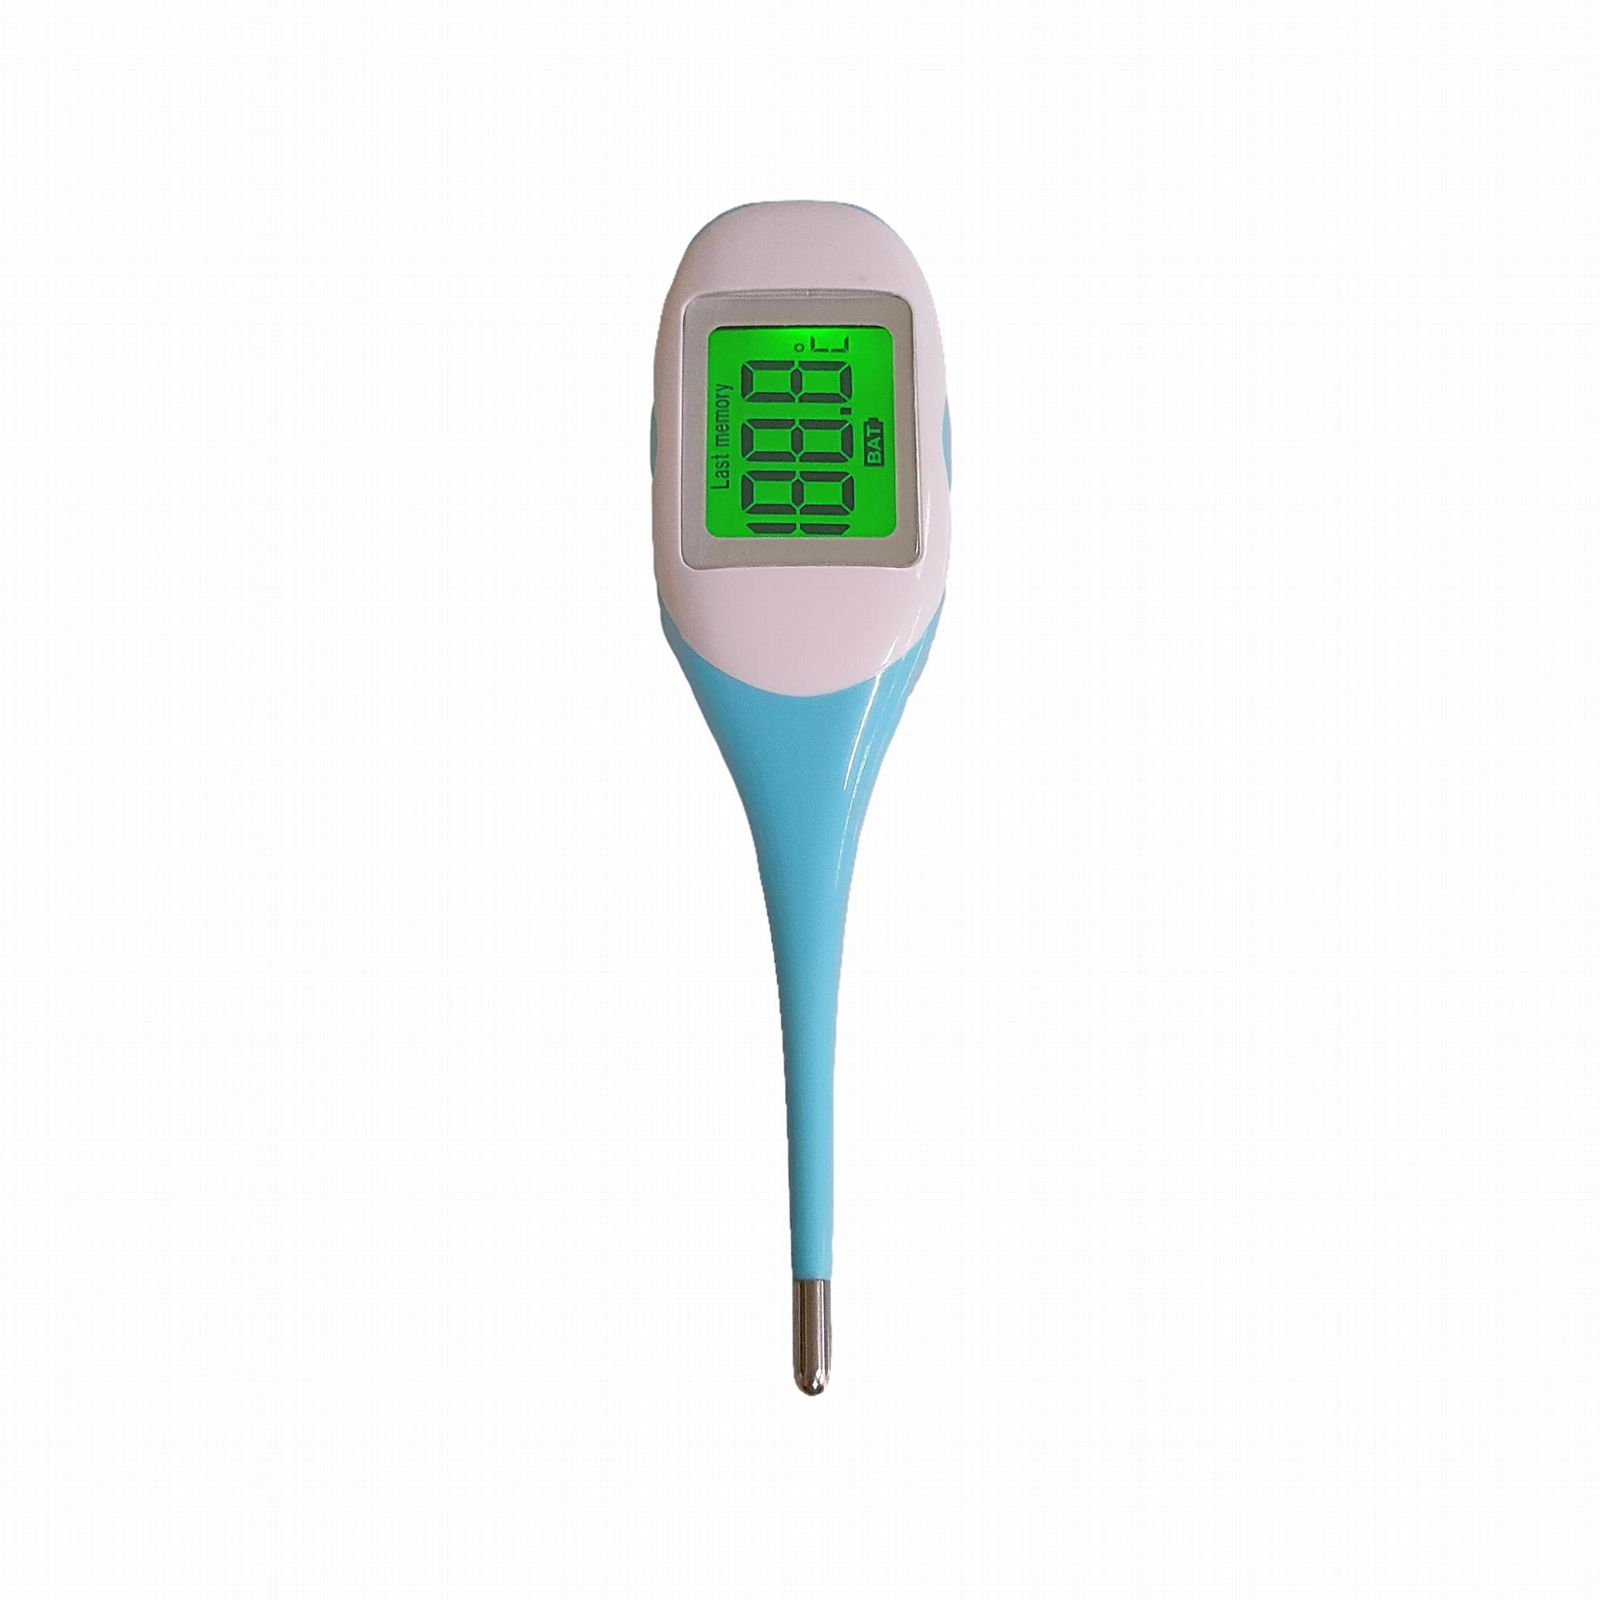 TM21      8 second FEVER GLOW Digital thermometer 5